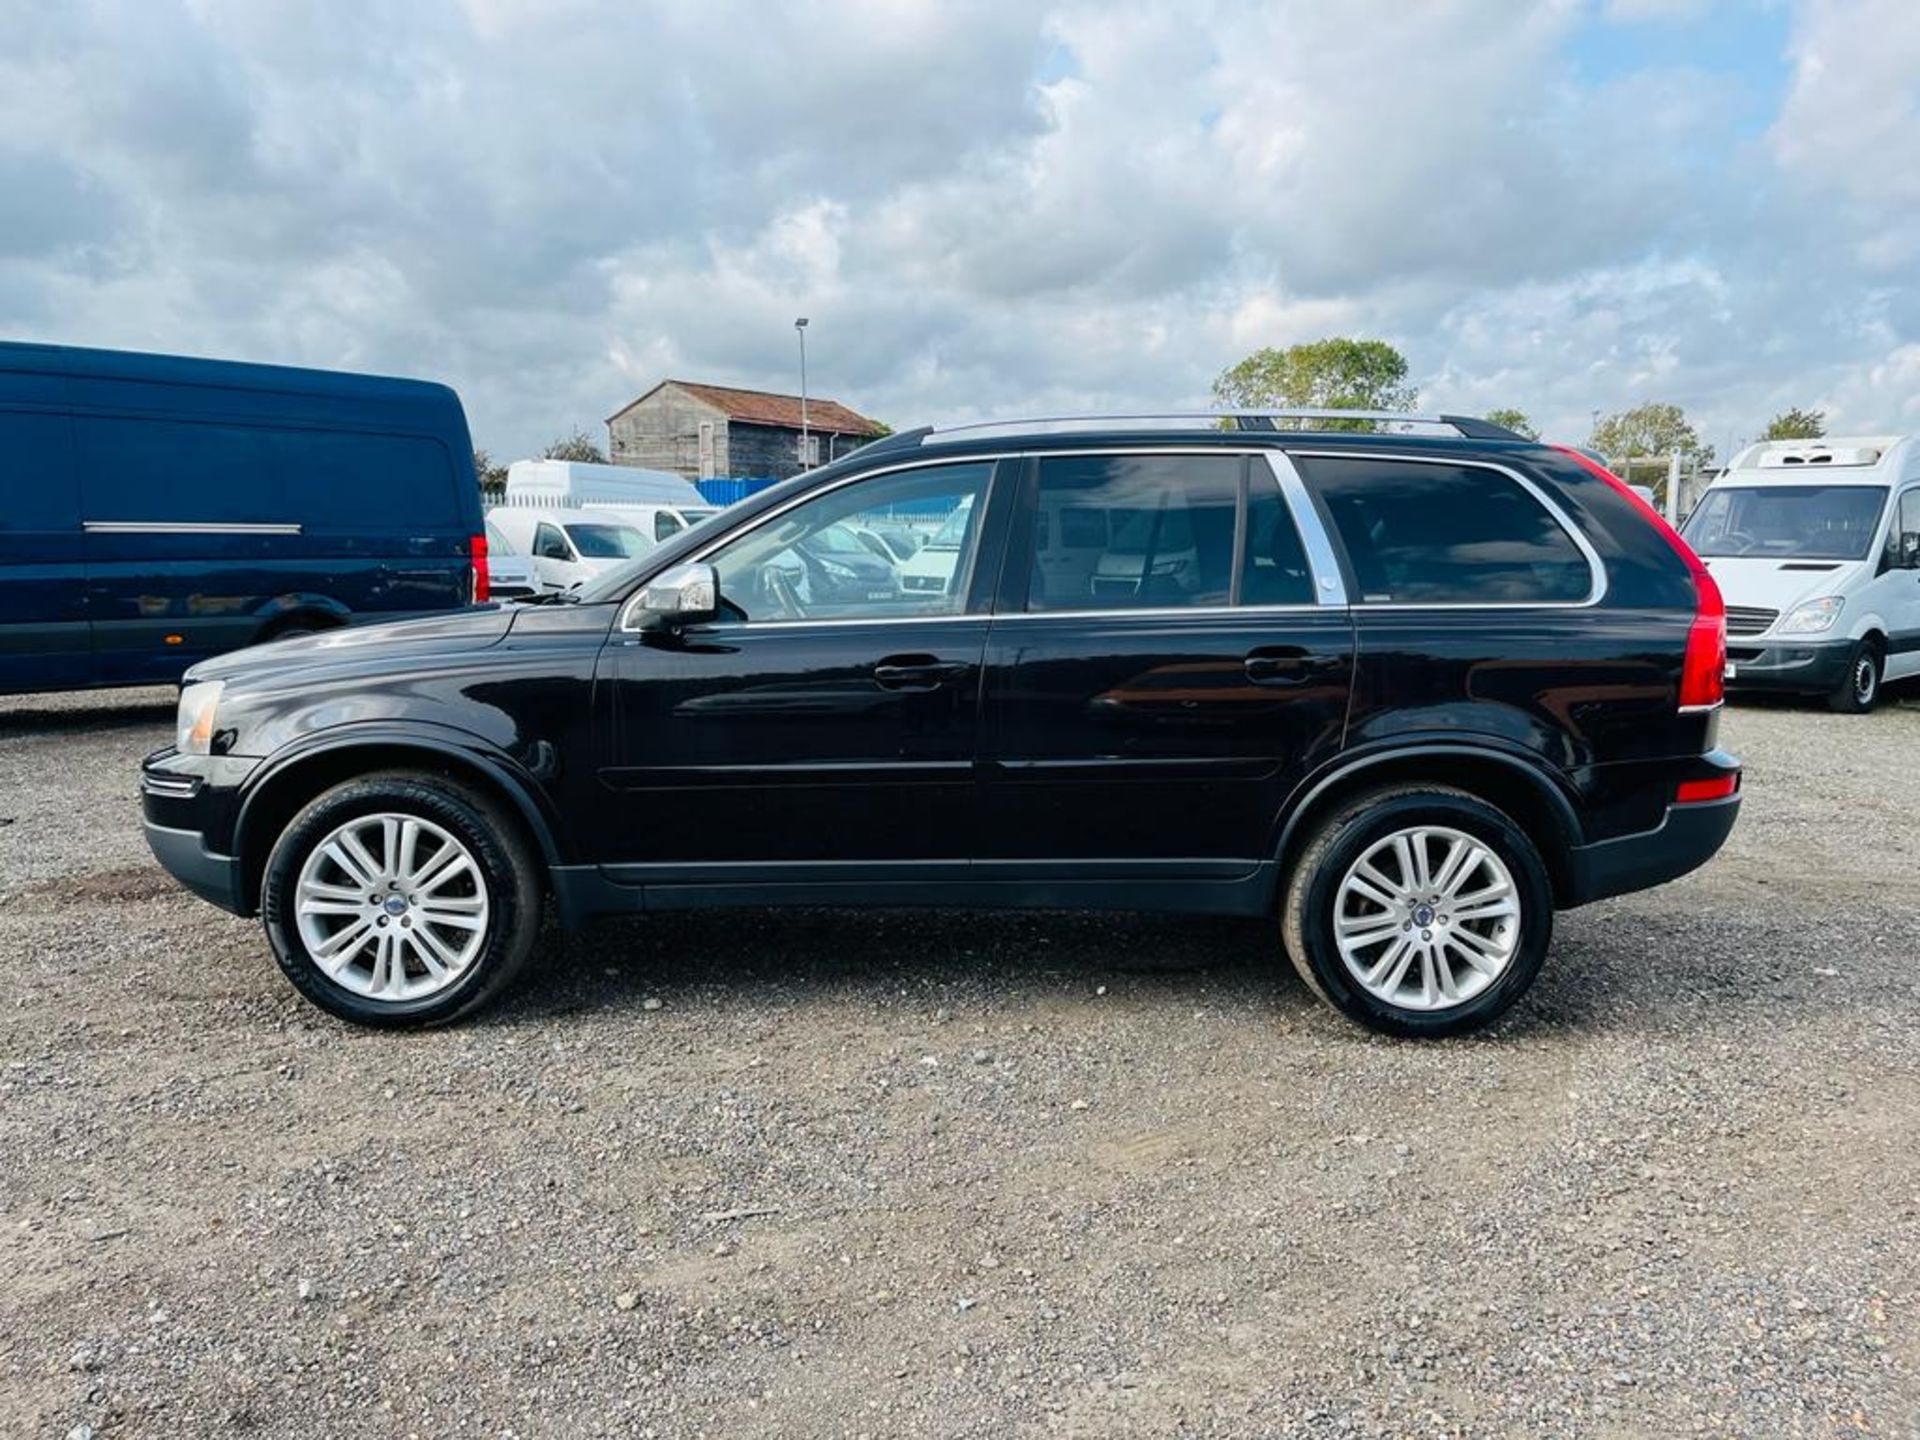 ** ON SALE ** Volvo XC90 2.4 D5 185 Executive G/T Estate 2009 '59 plate' - Climate Control - No Vat - Image 12 of 30